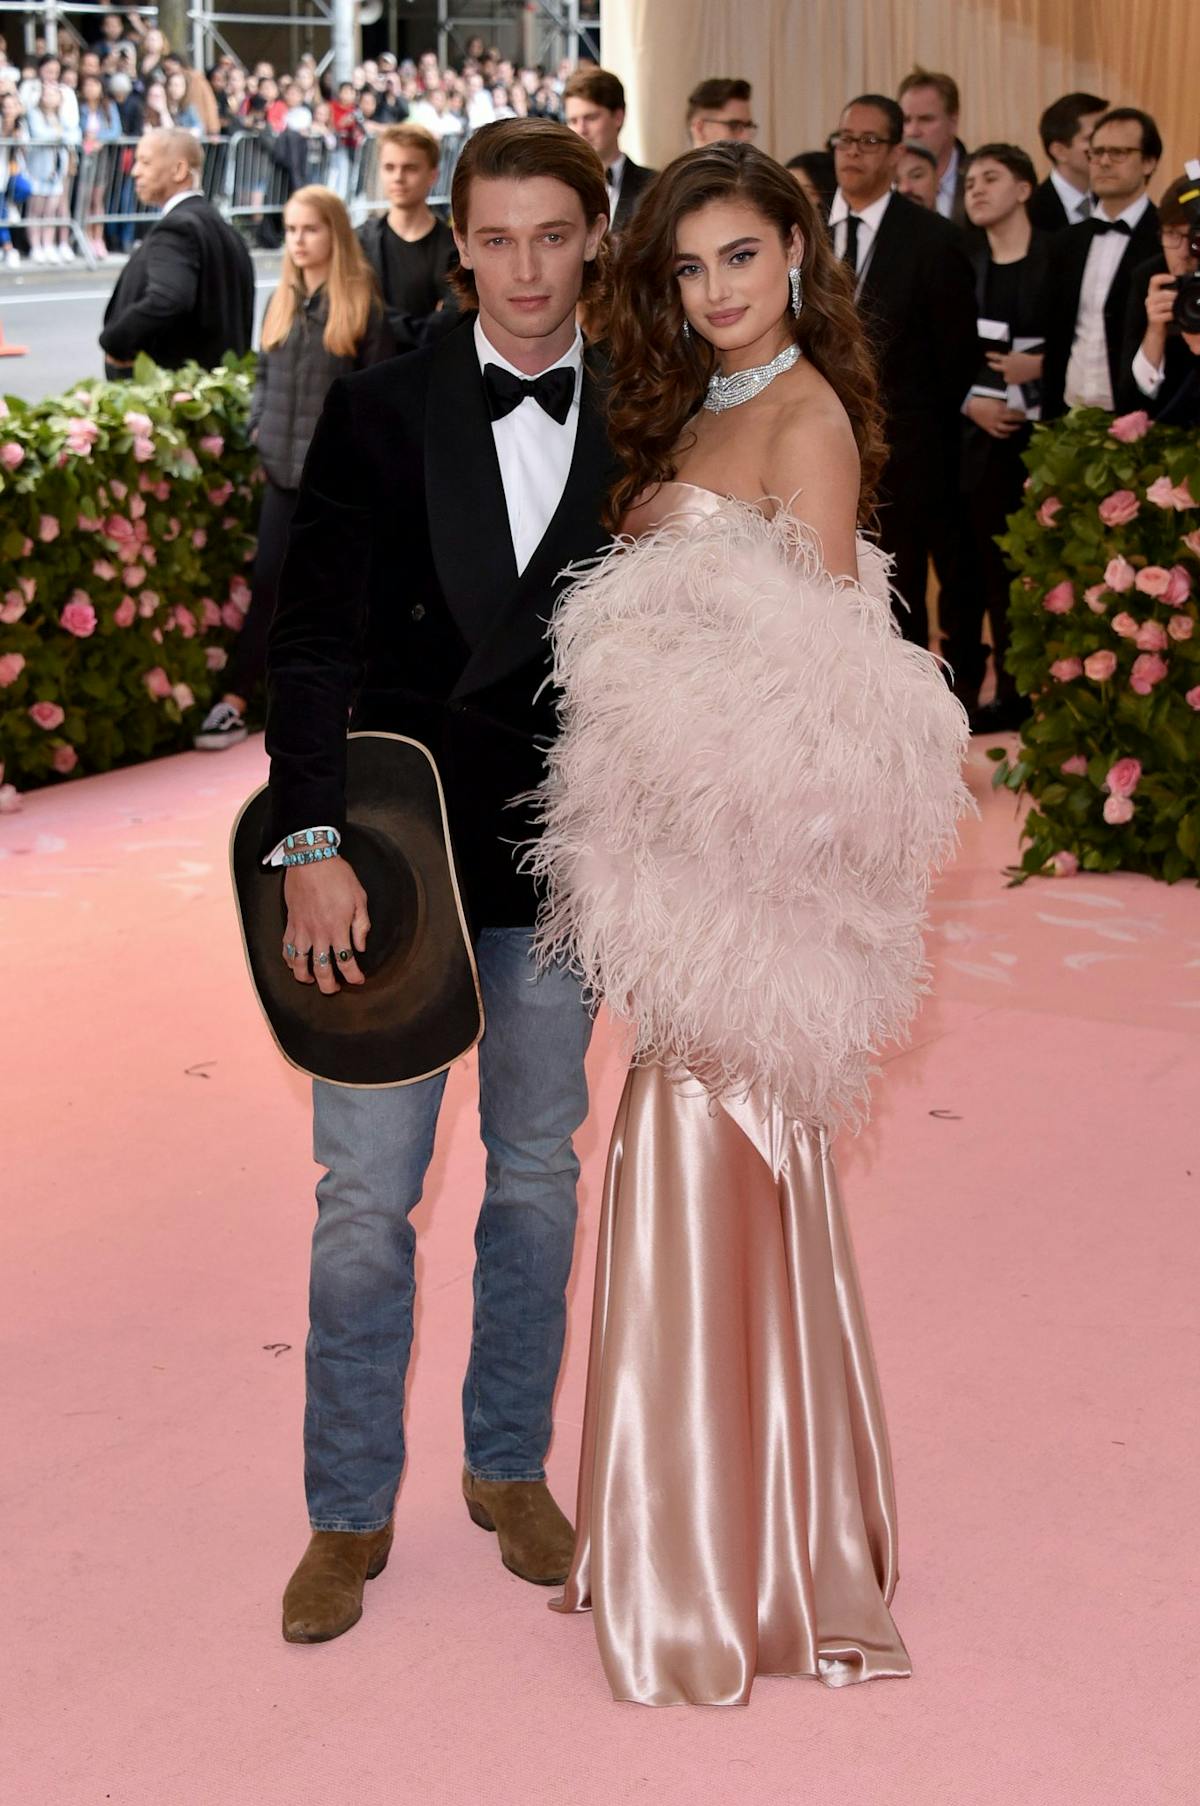 Met Gala 2019: political statements, the messages you missed